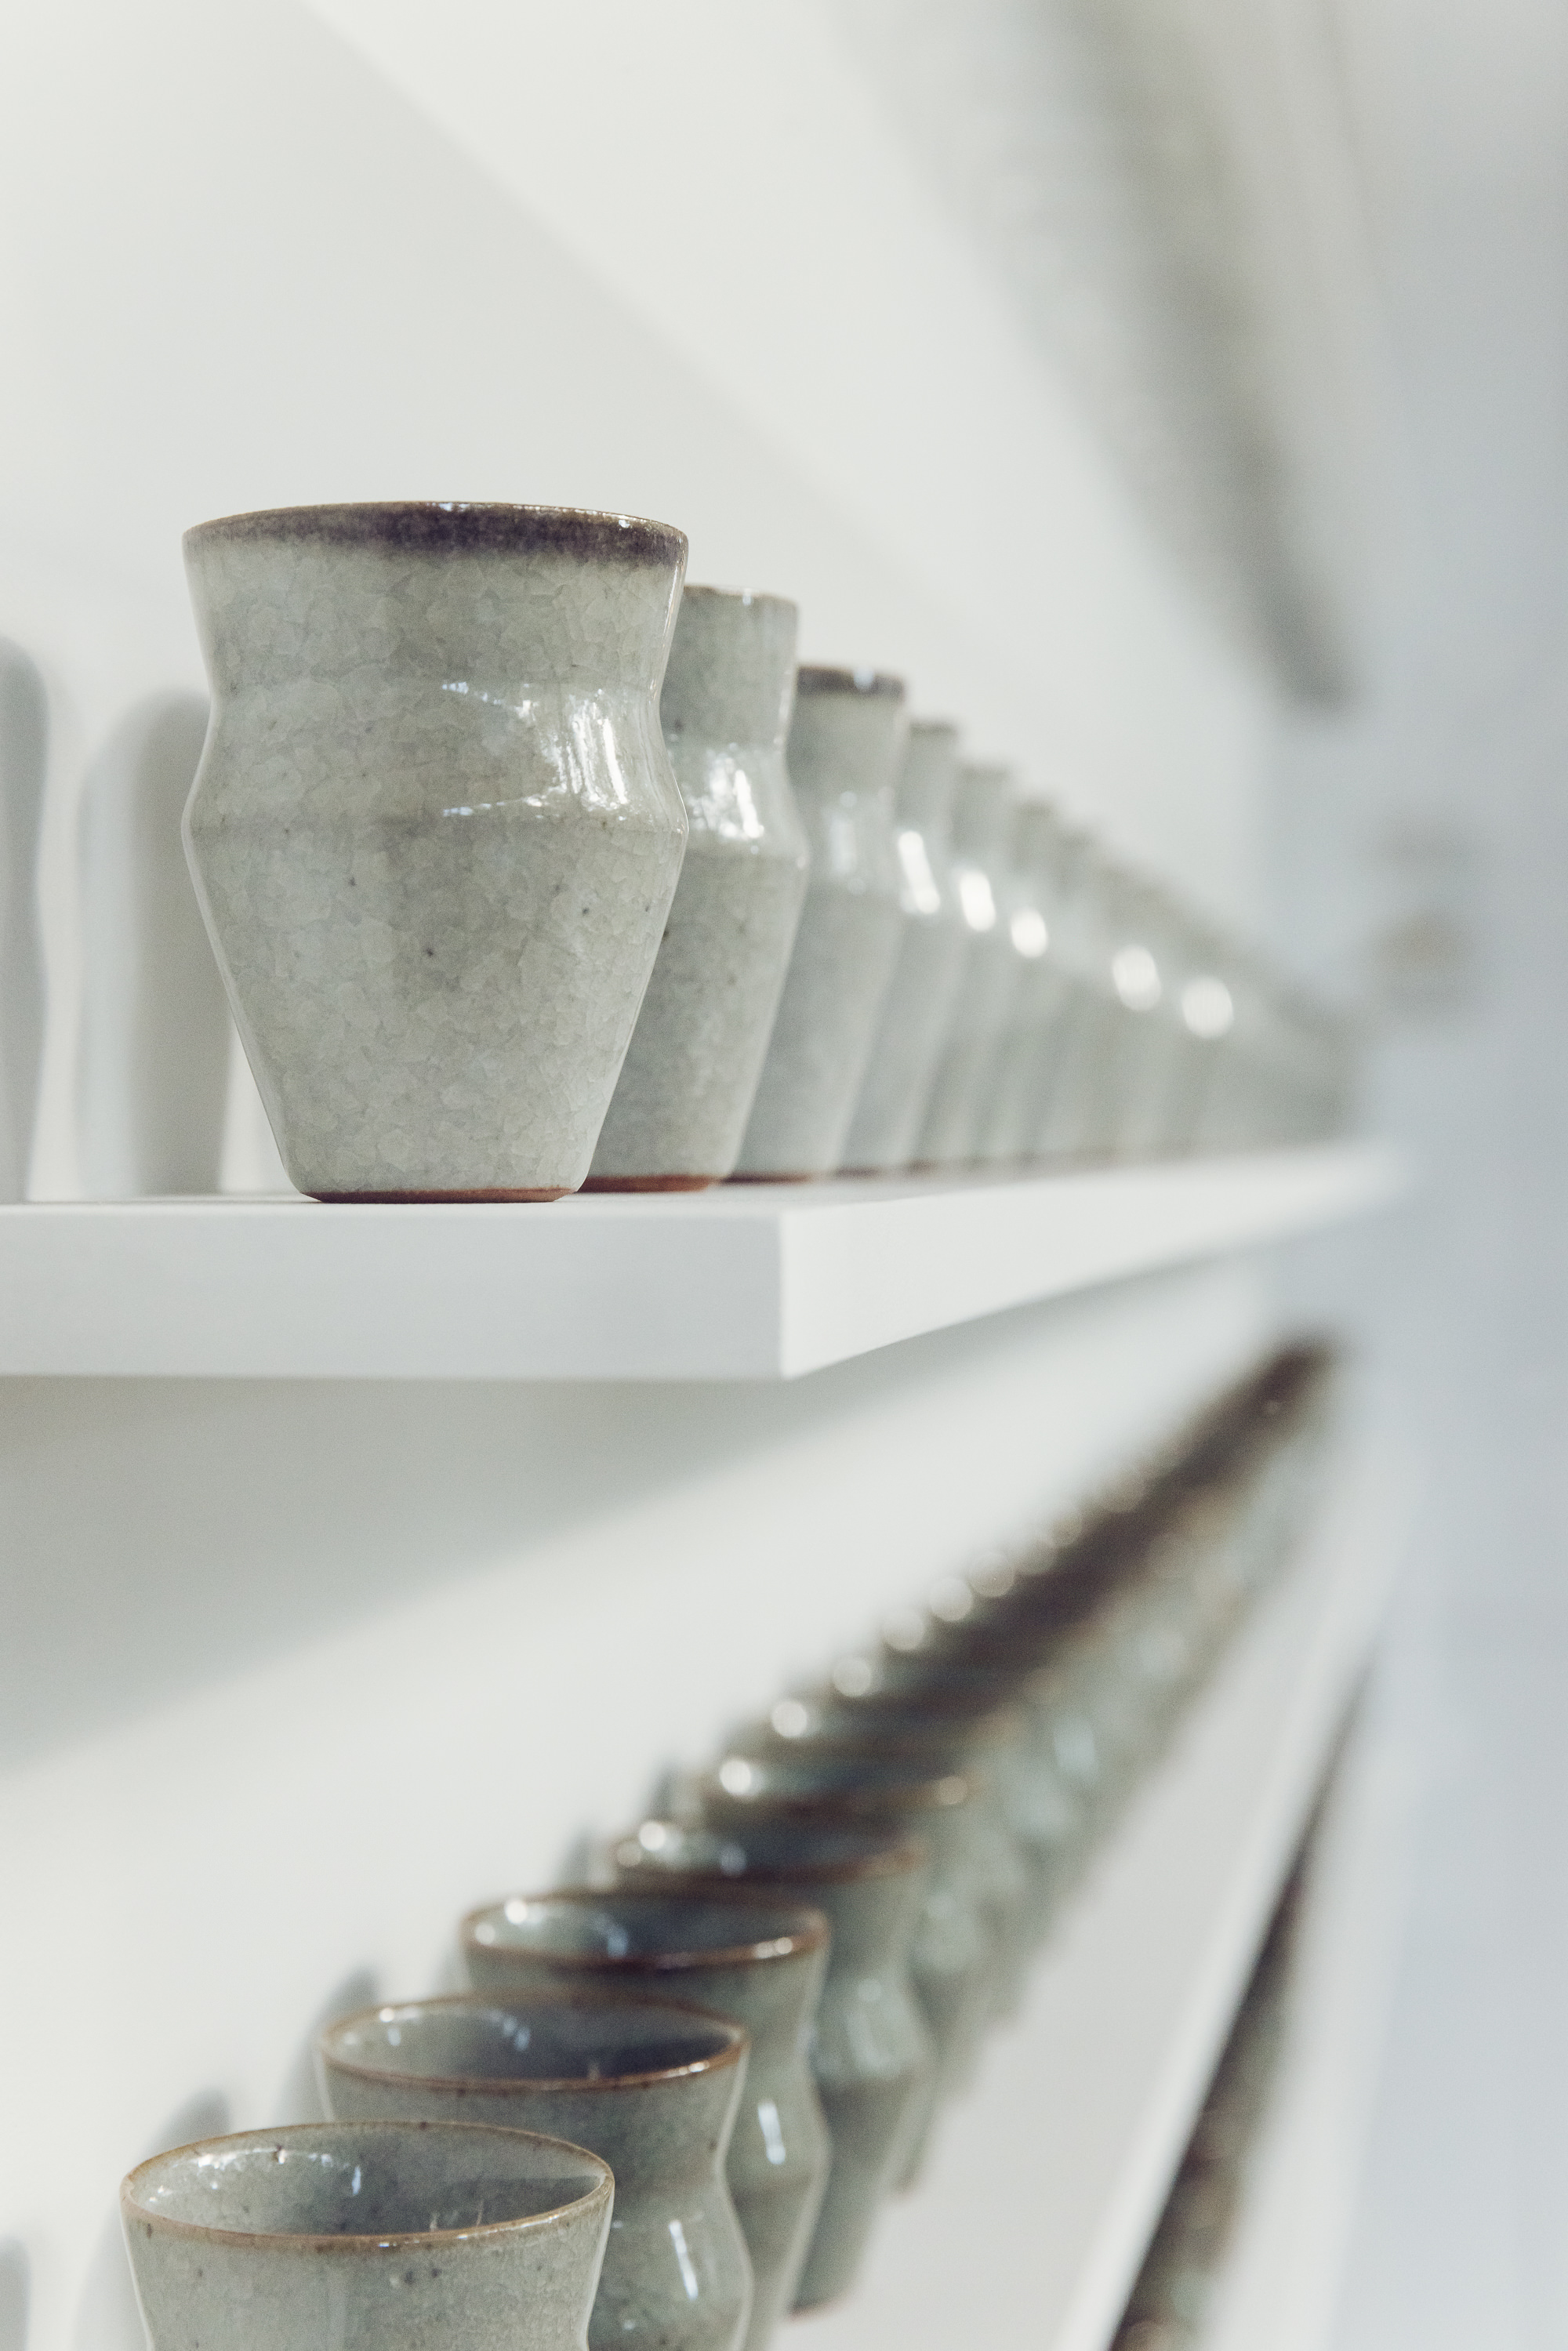 Two shelves stacked with small ceramic vessels